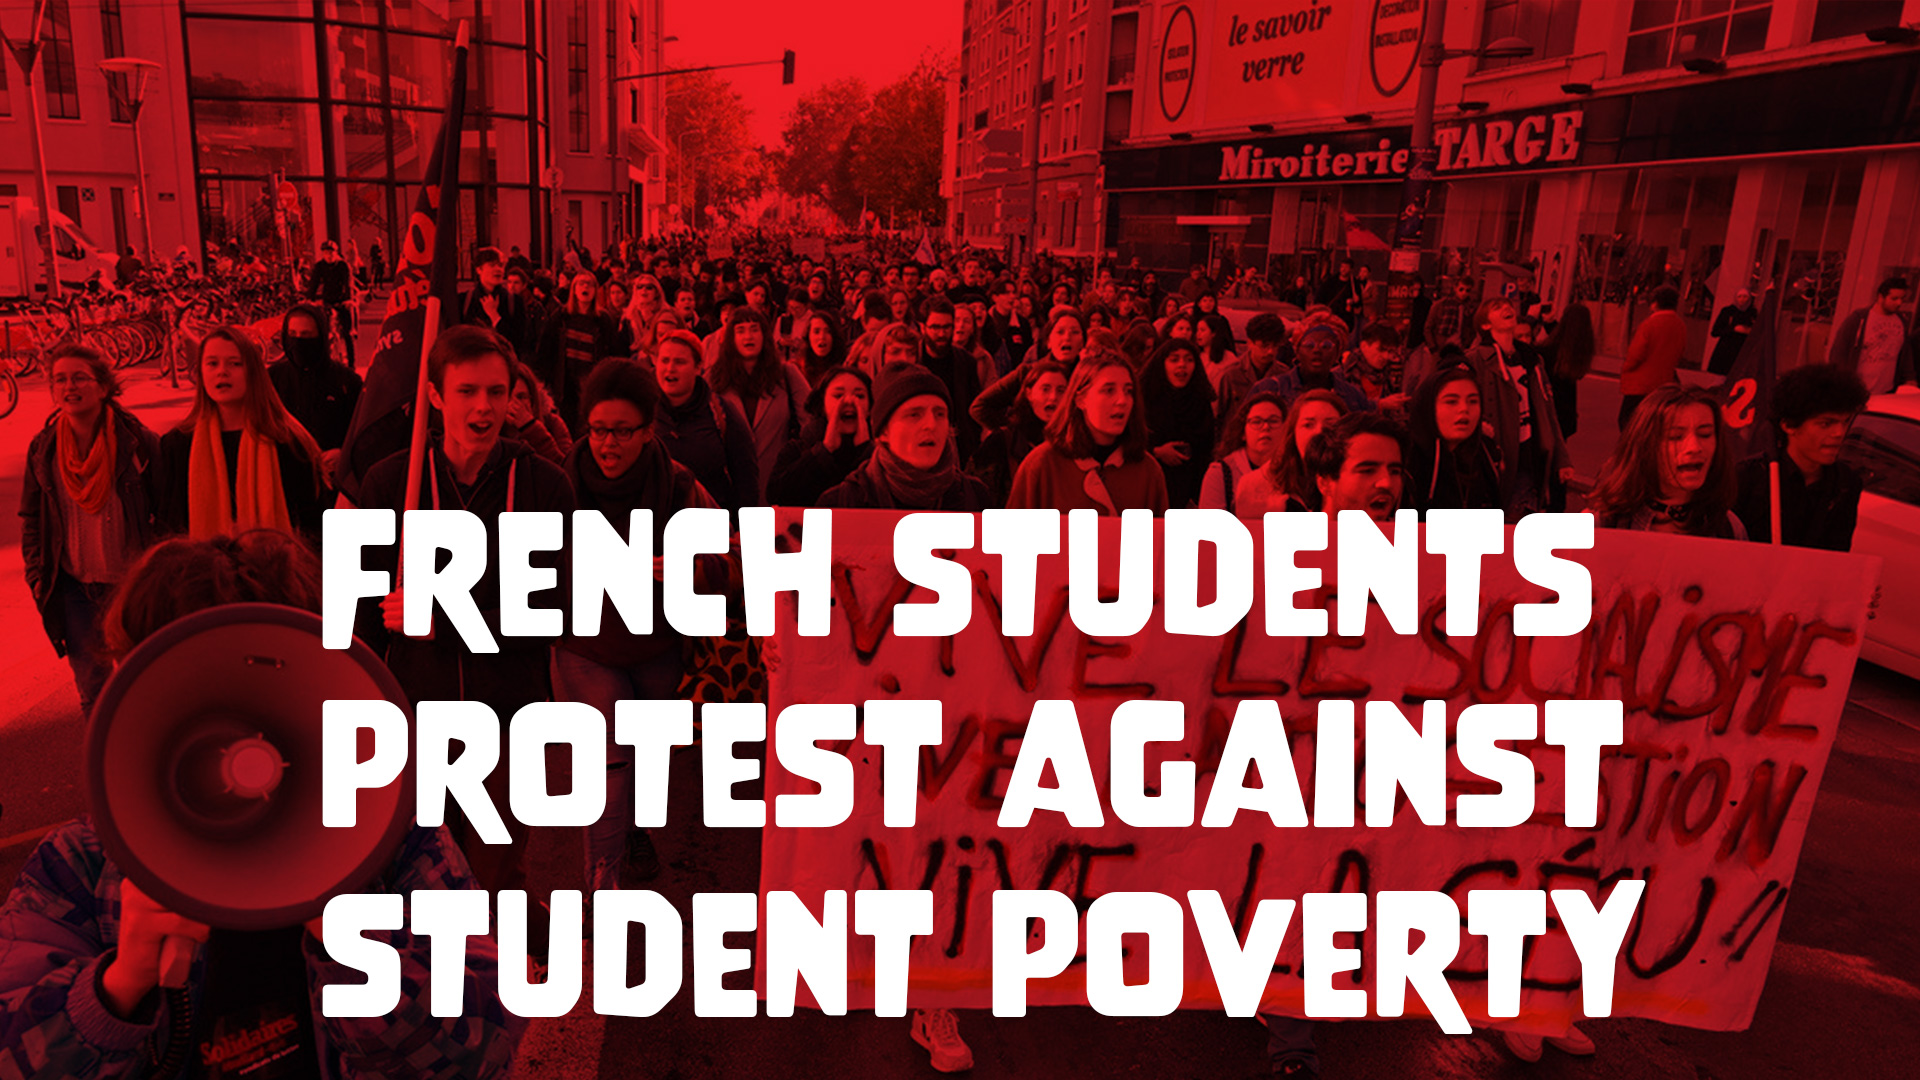 French students protest against student poverty